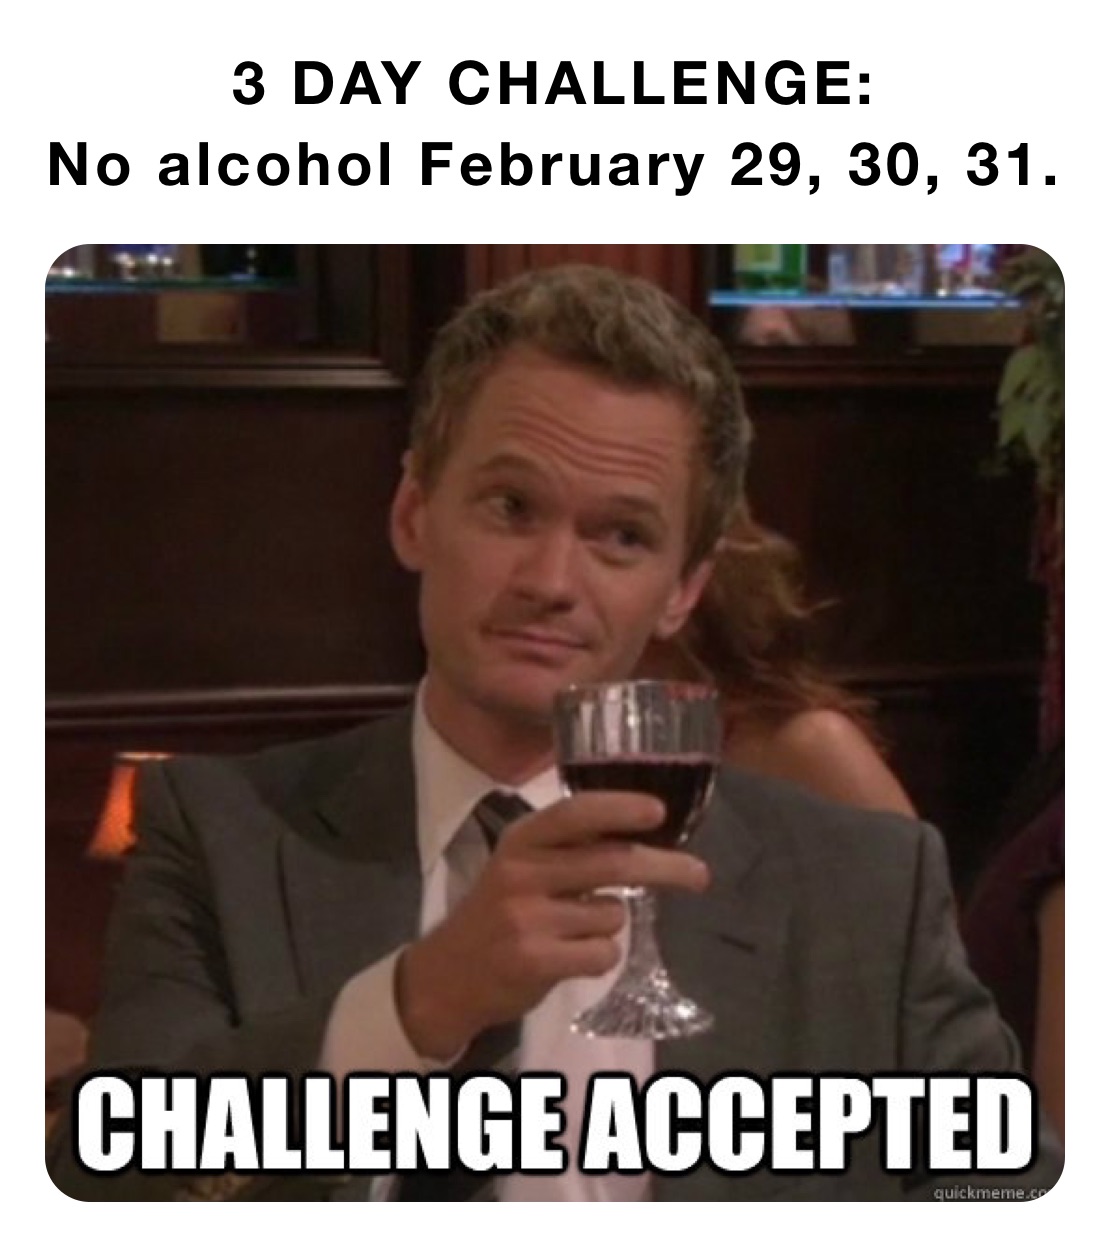 3 DAY CHALLENGE:
No alcohol February 29, 30, 31. 